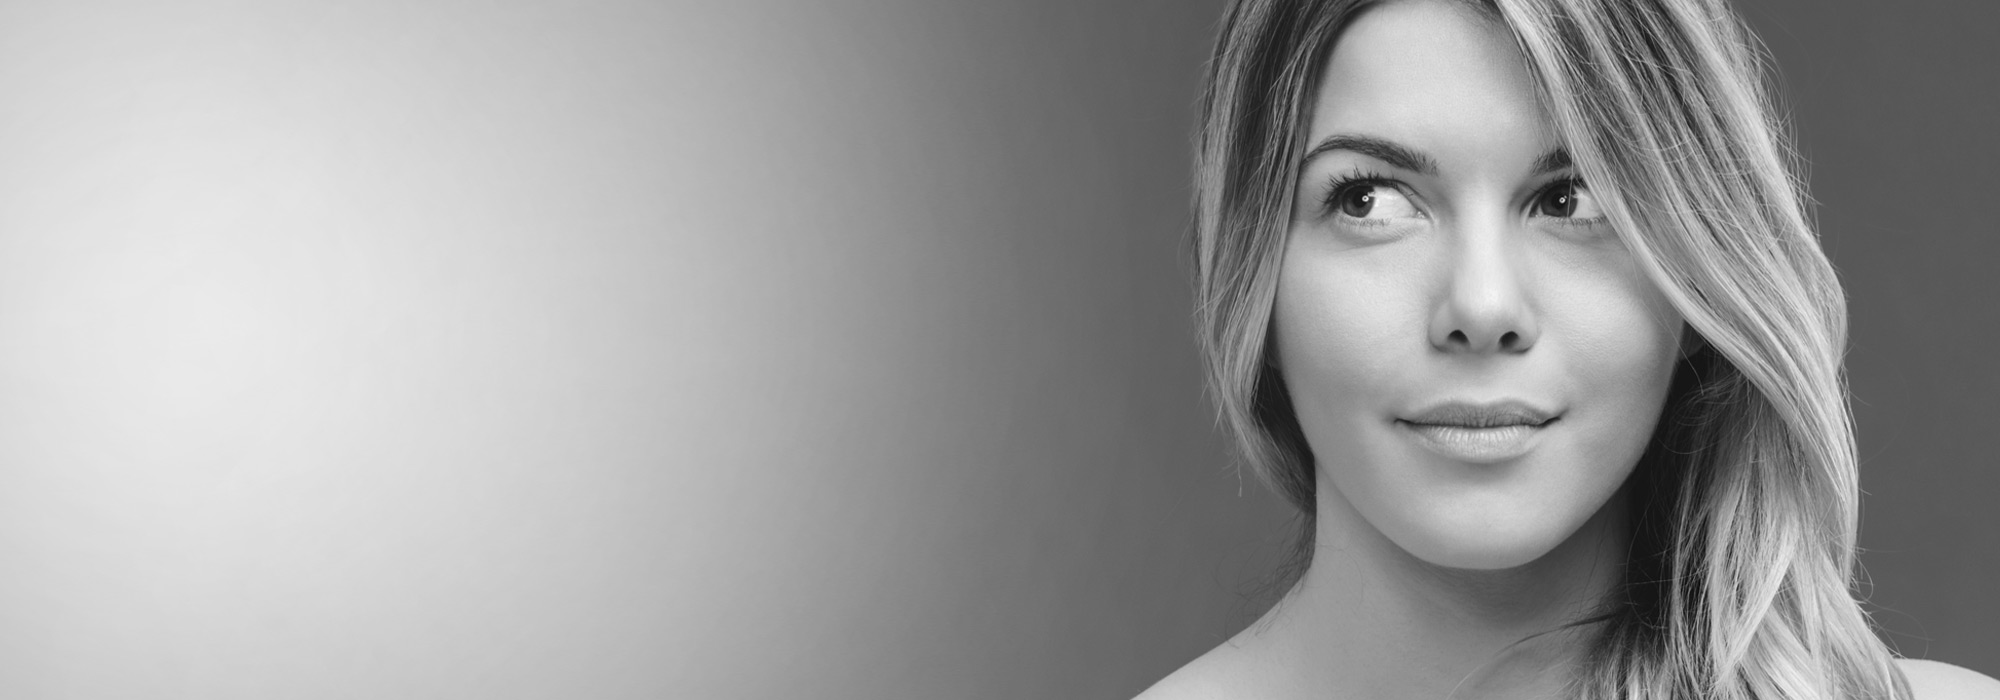 Model Picture for Restylane treatment Page